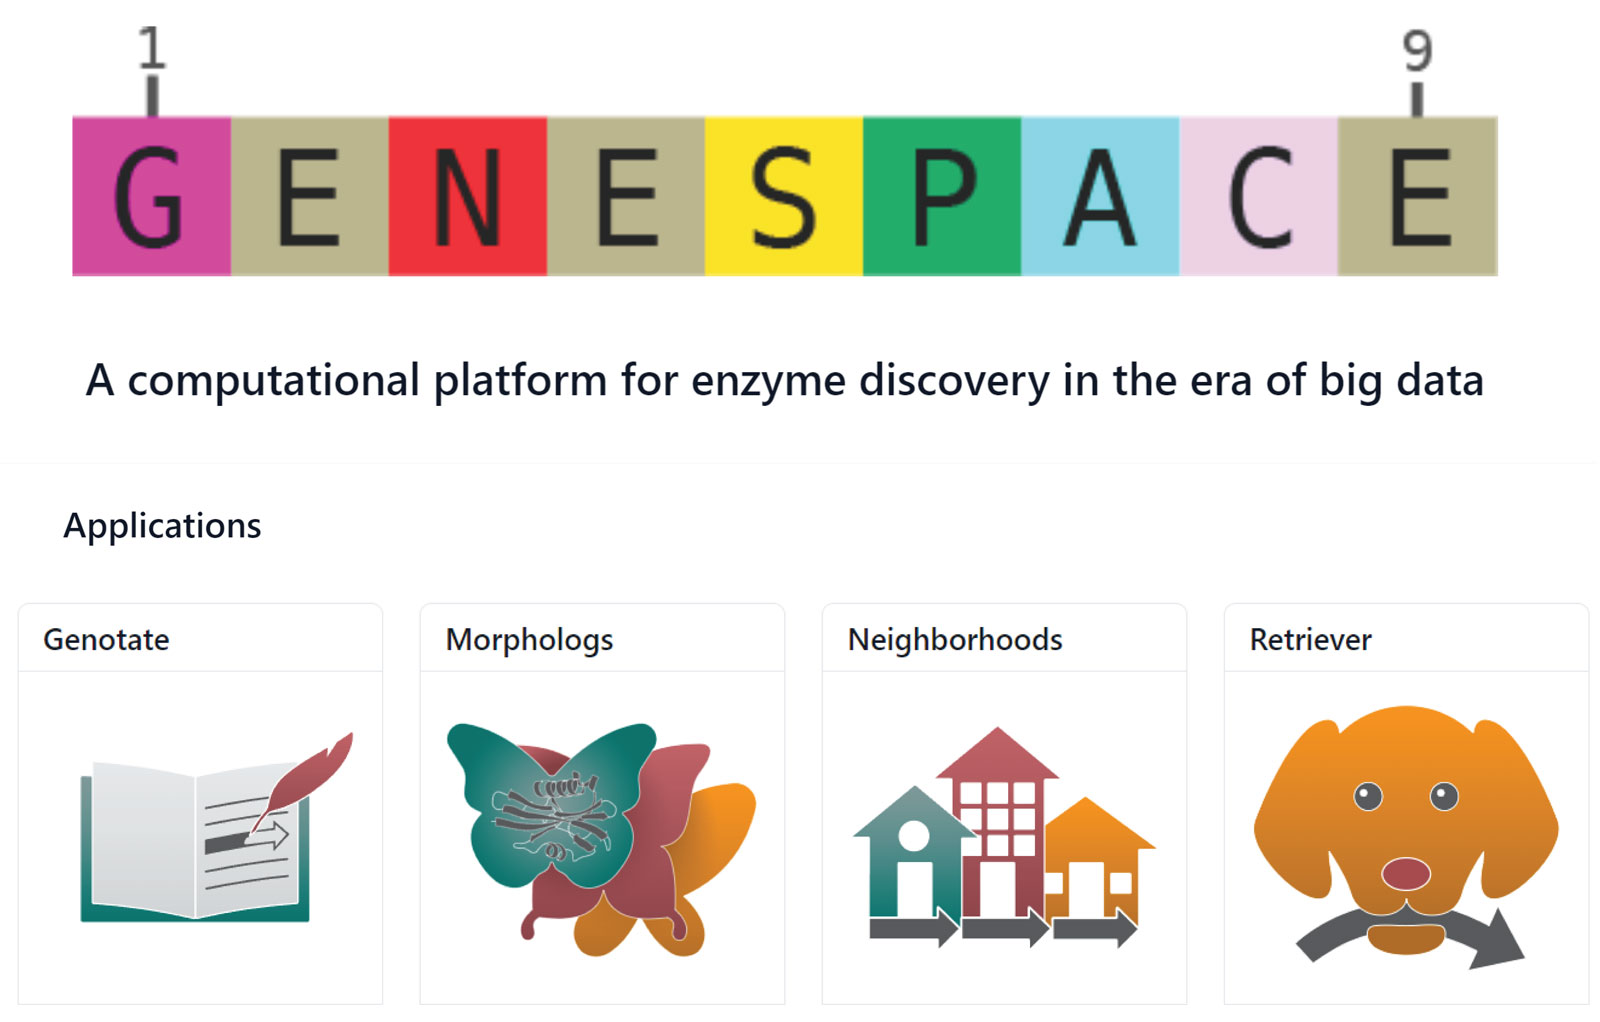 Diagram showing how genespace is a computational platform for enzyme discovery